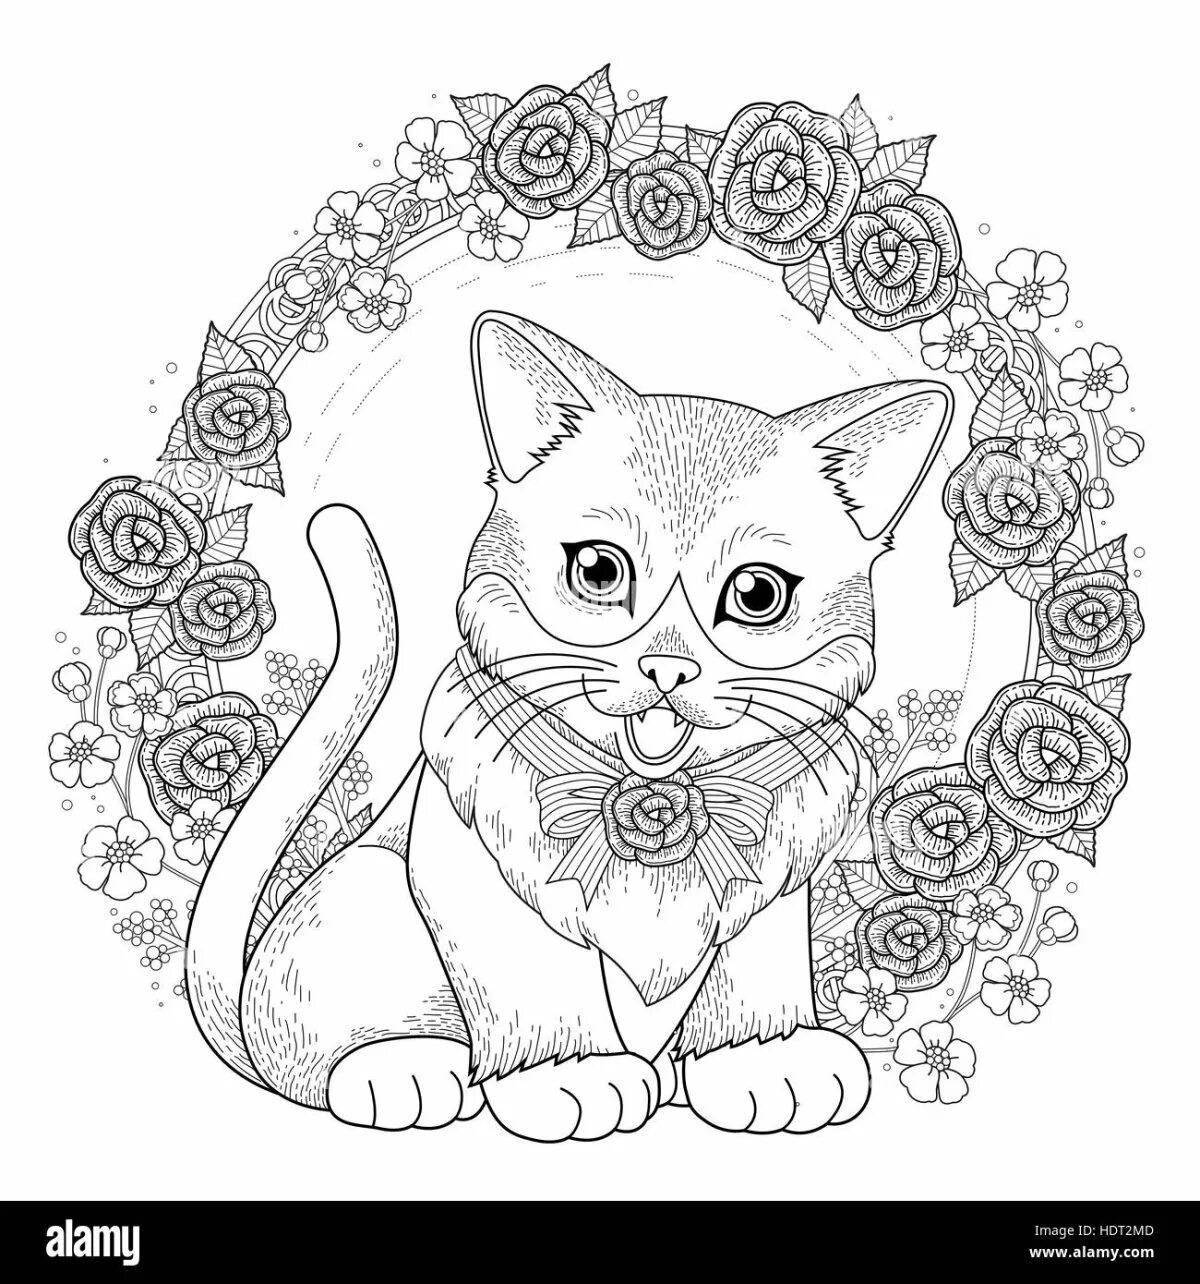 Cute kitten in a cup coloring book